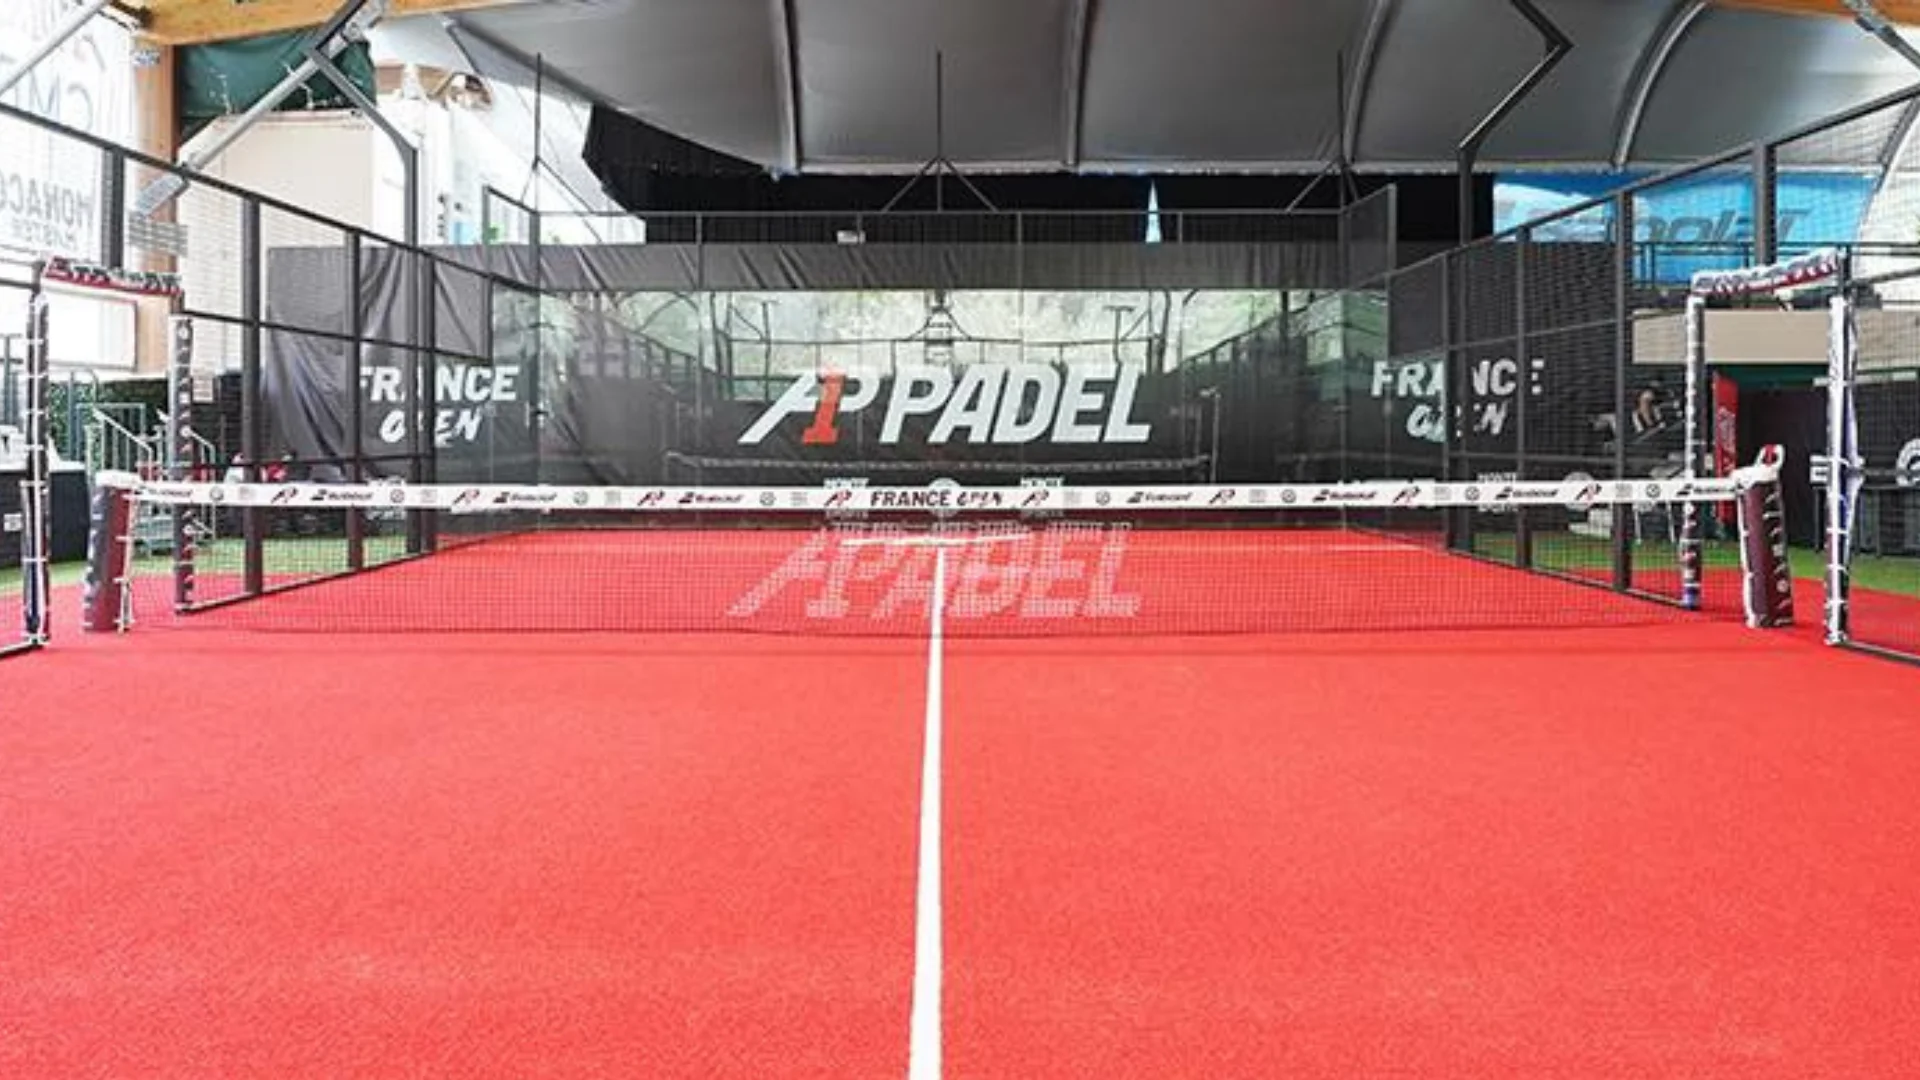 A1 Padel France Grand Master: Inzerillo and Vives fall heavily against Perry / Pascoal